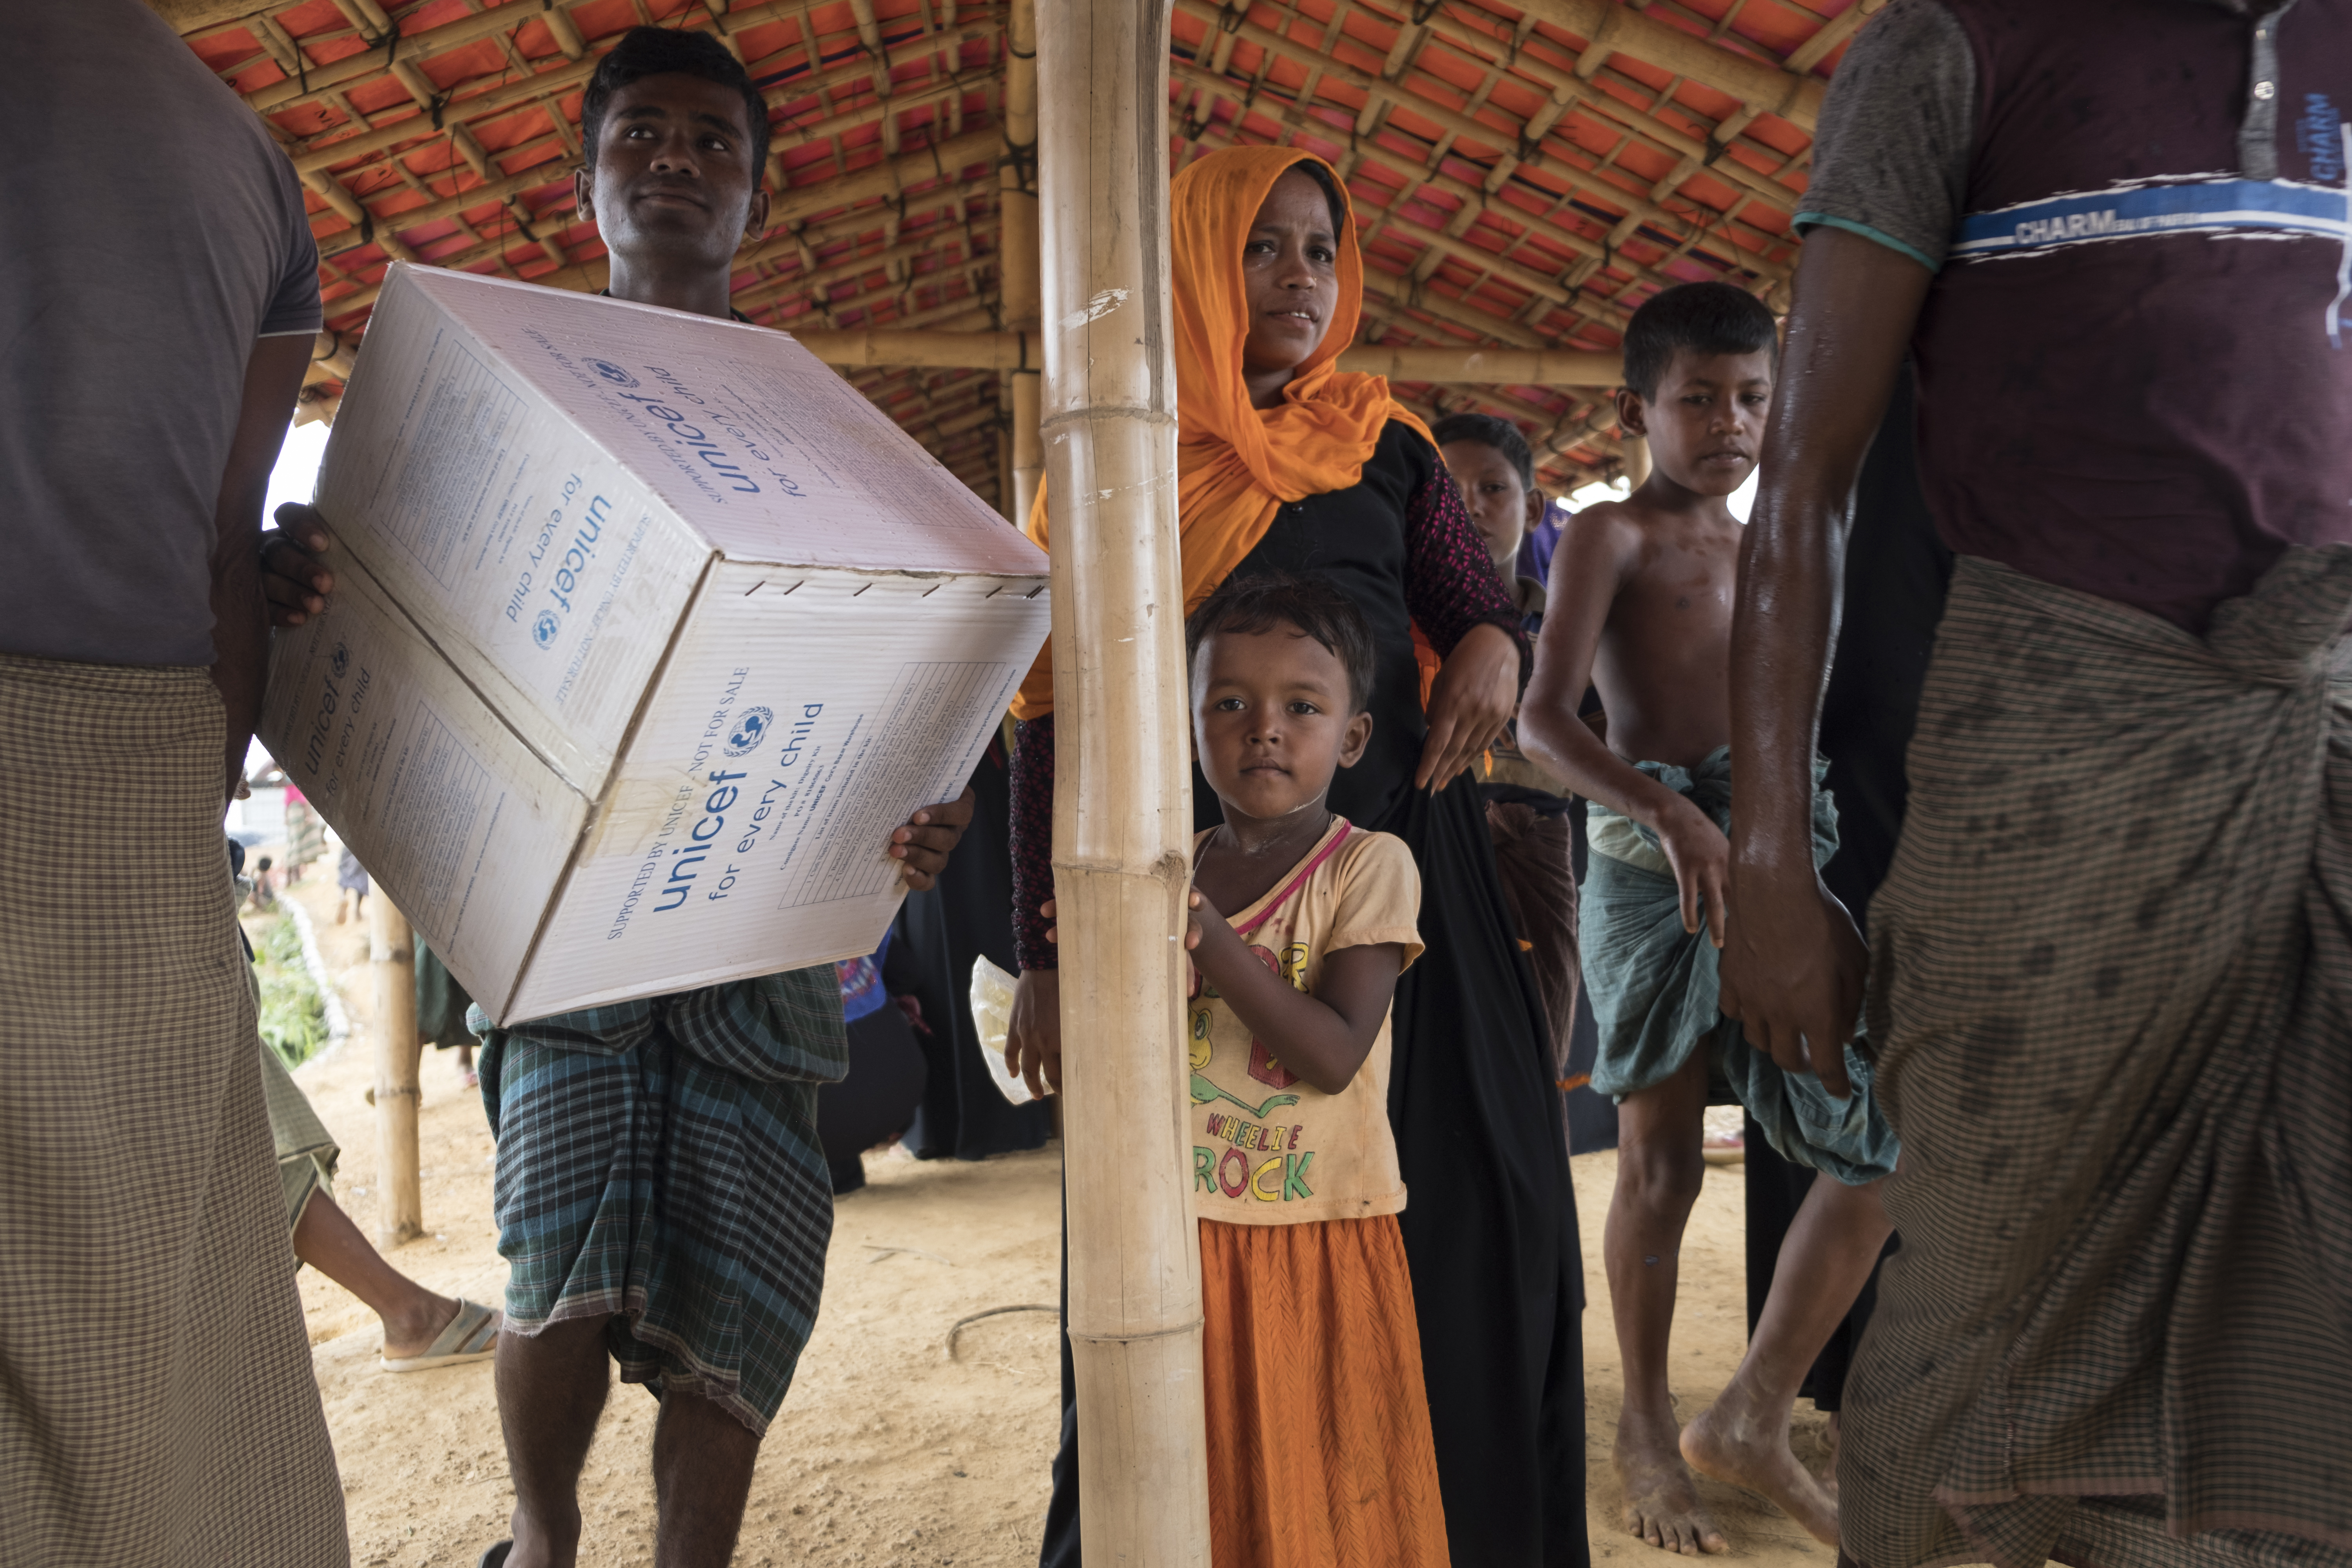 On 26 June 2019, girls and women in the Kutupalong refugee camp in Cox’s Bazar, Bangladesh receive a UNICEF “Dignity Kit,” which contains sanitary napkins, laundry soap, a bucket with a lid, underwear, a scarf, flip flops and a solar torch. 